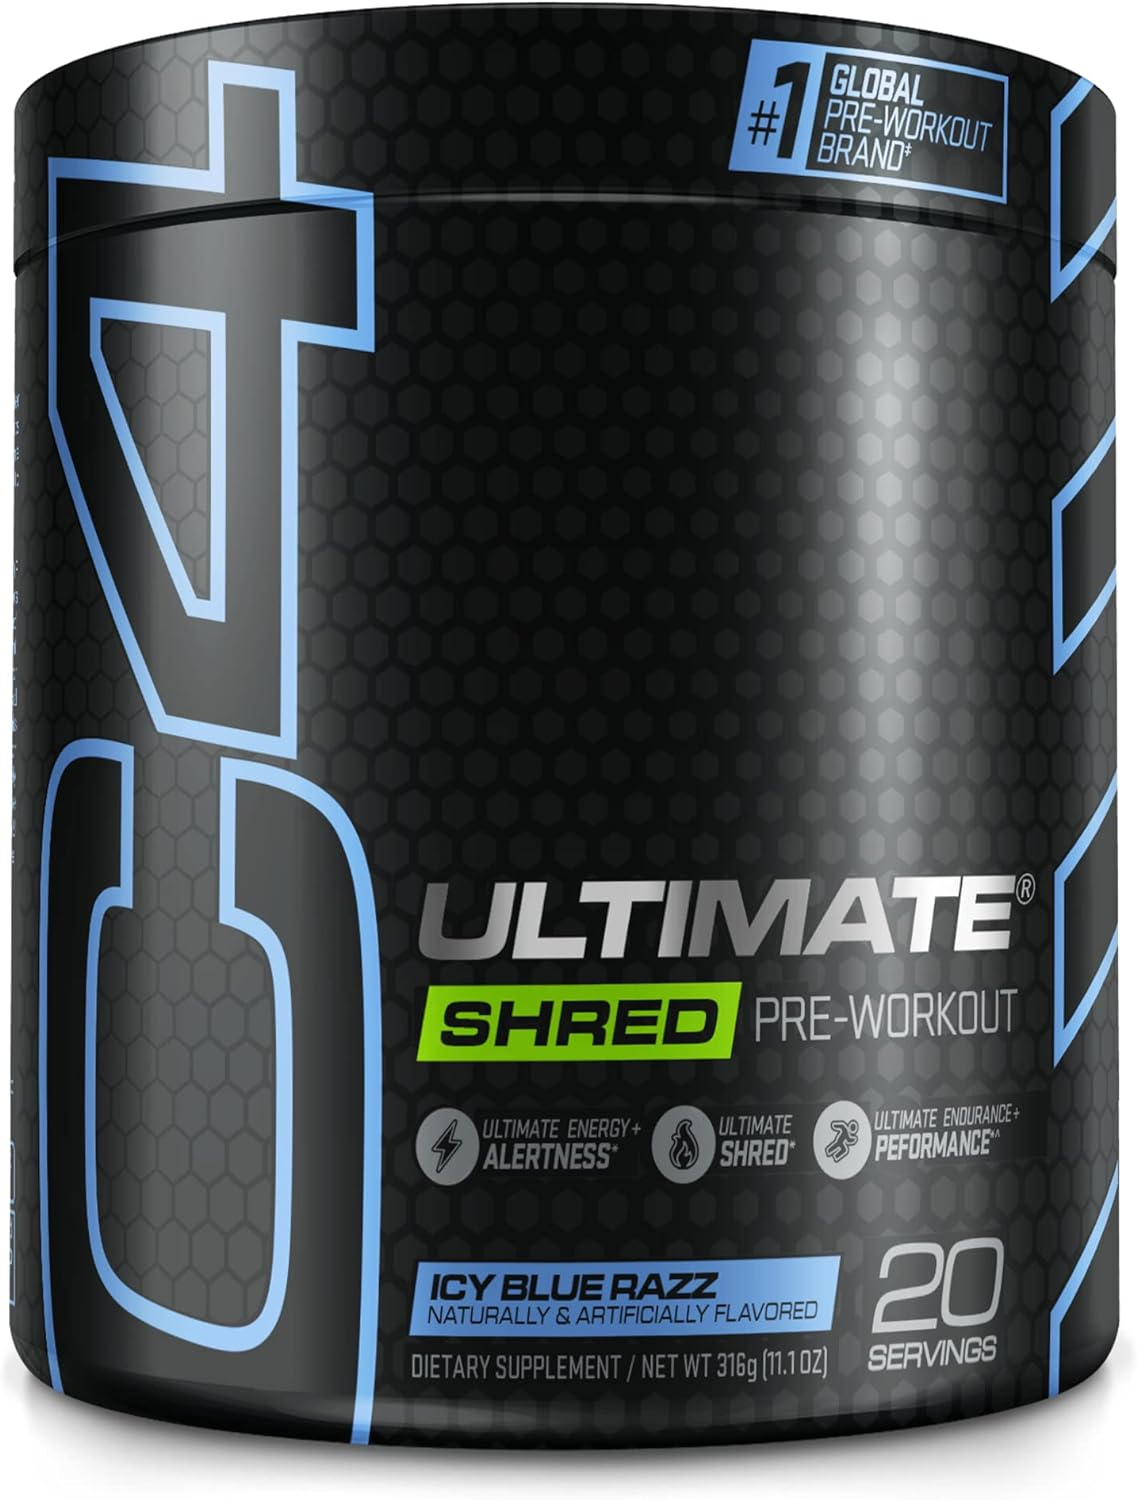 Cellucor C4 Ultimate Shred Pre Workout Powder for Men  Women, Metabolism Supplement with Ginger Root Extract, ICY Blue Razz, 20 Servings (Pack of 1)